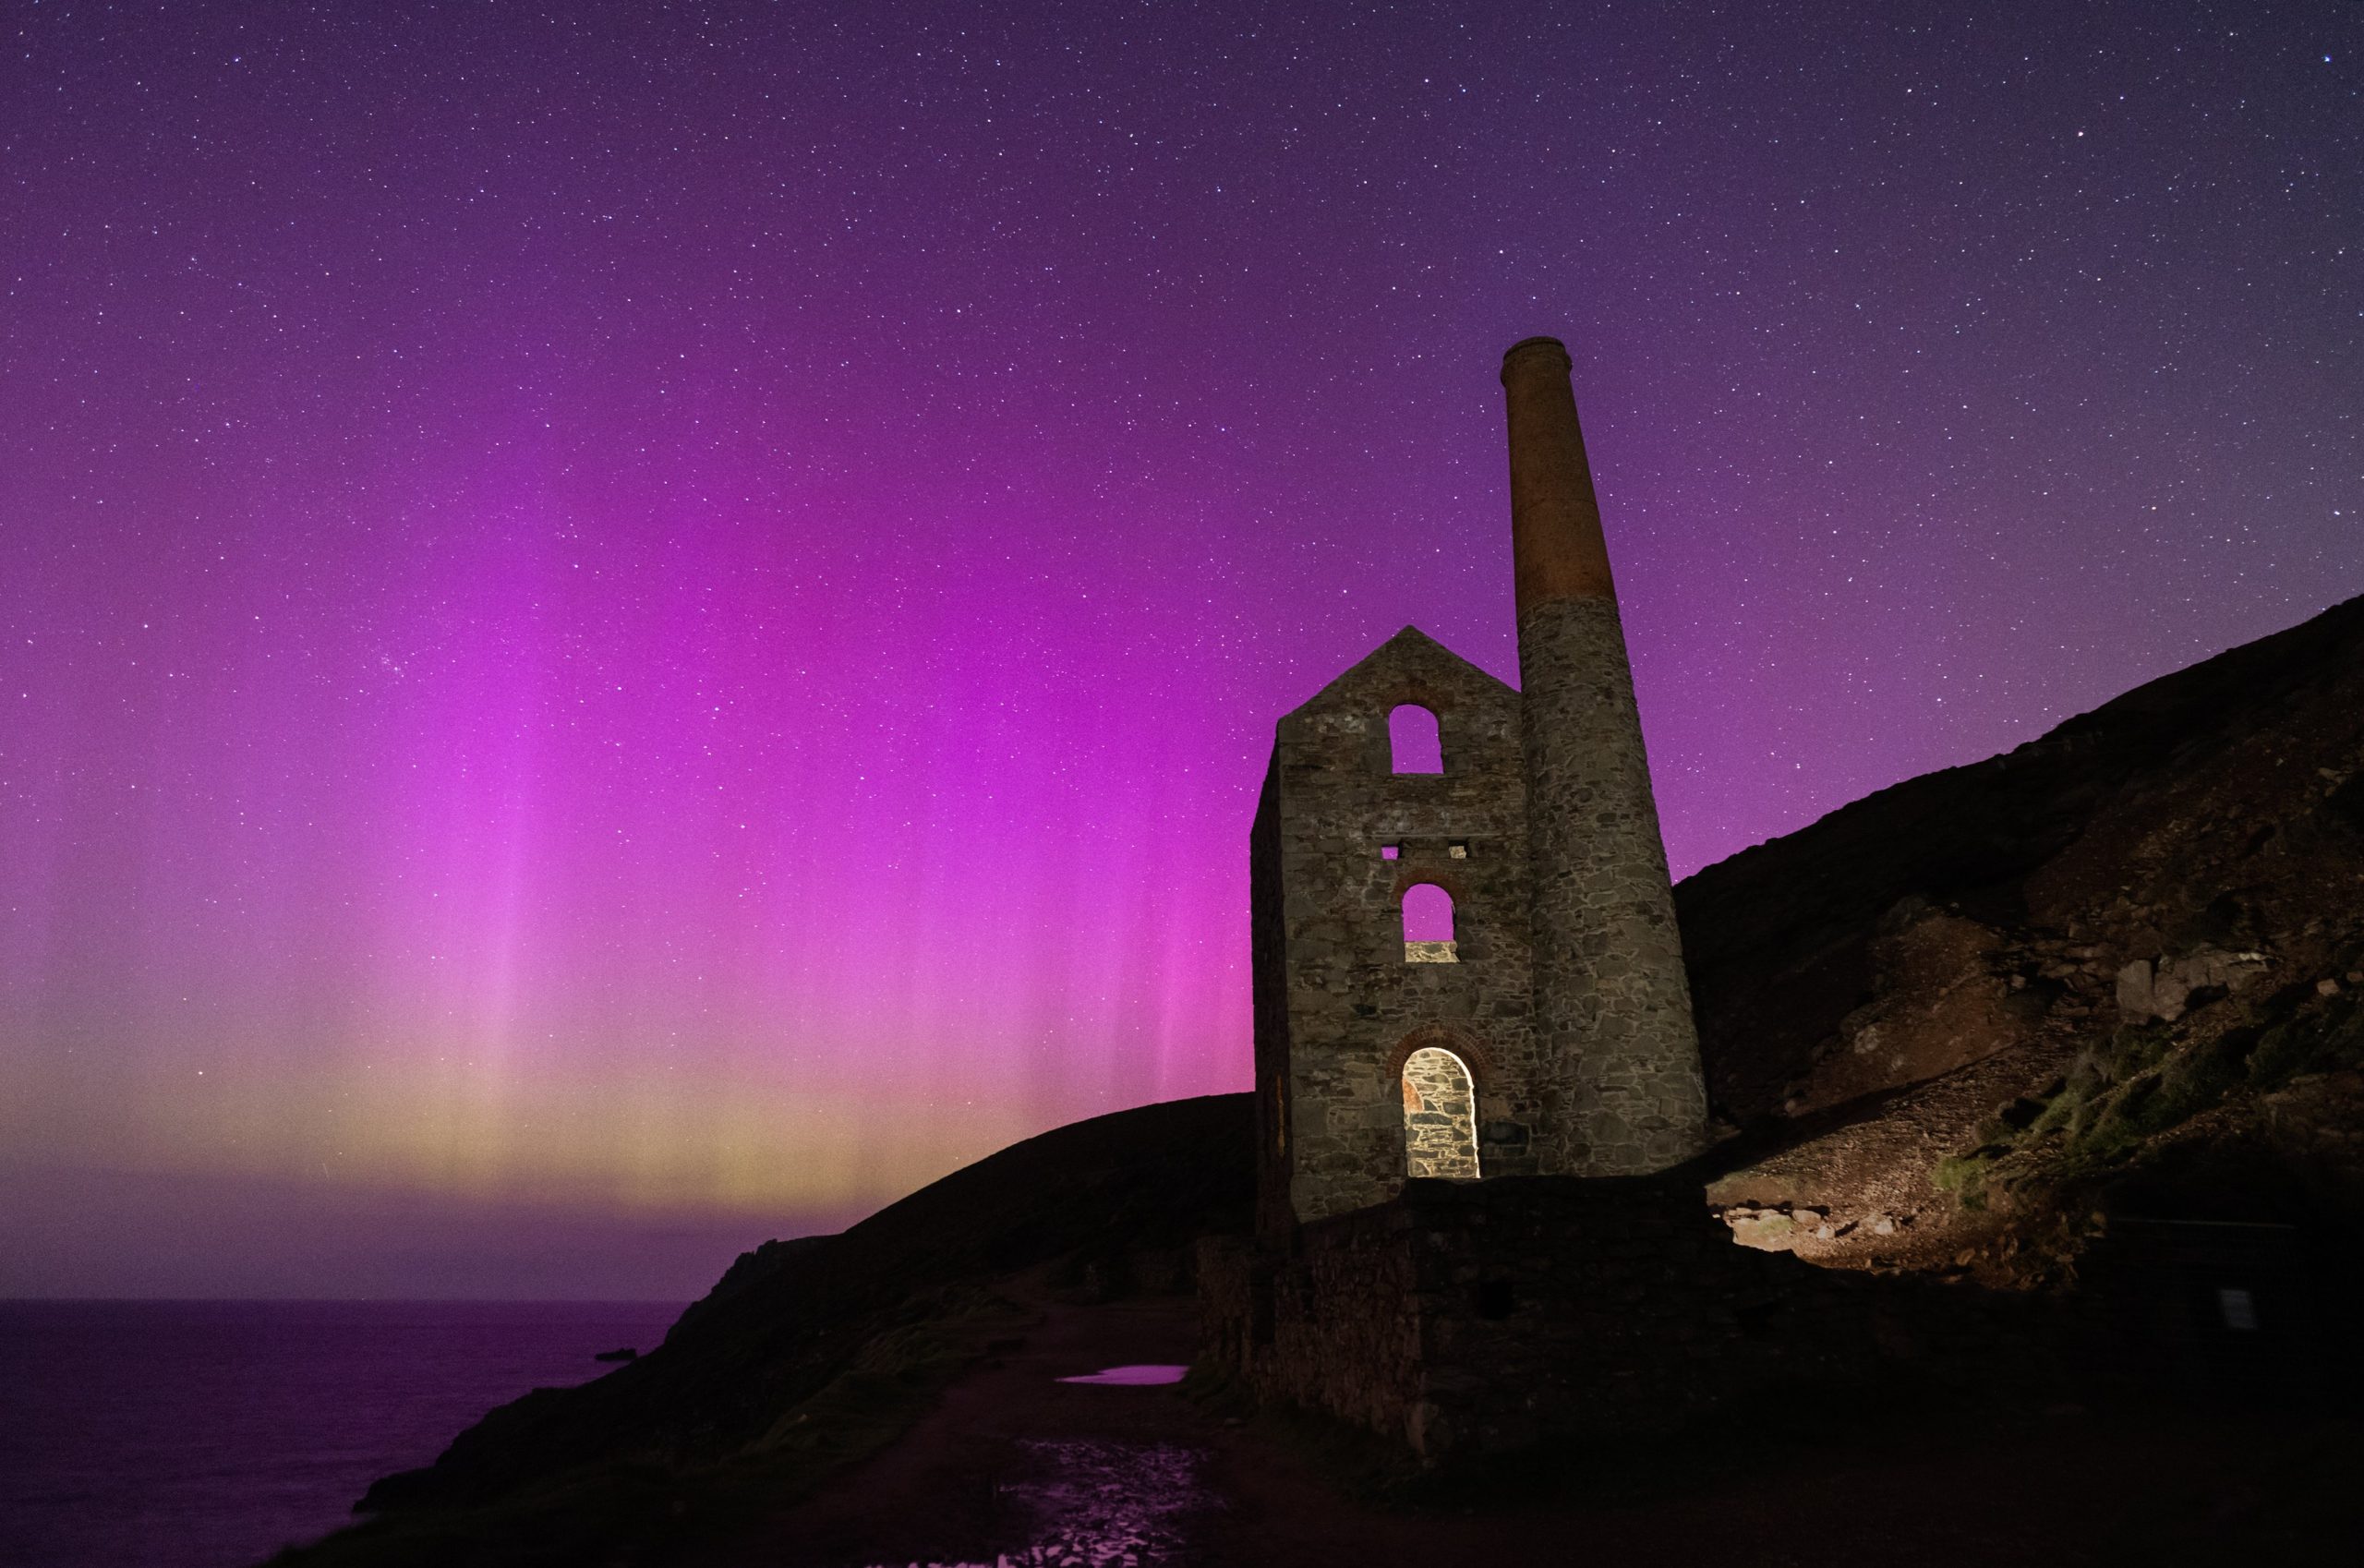 Northern Lights in the UK put on a “spectacular” rare display in the South